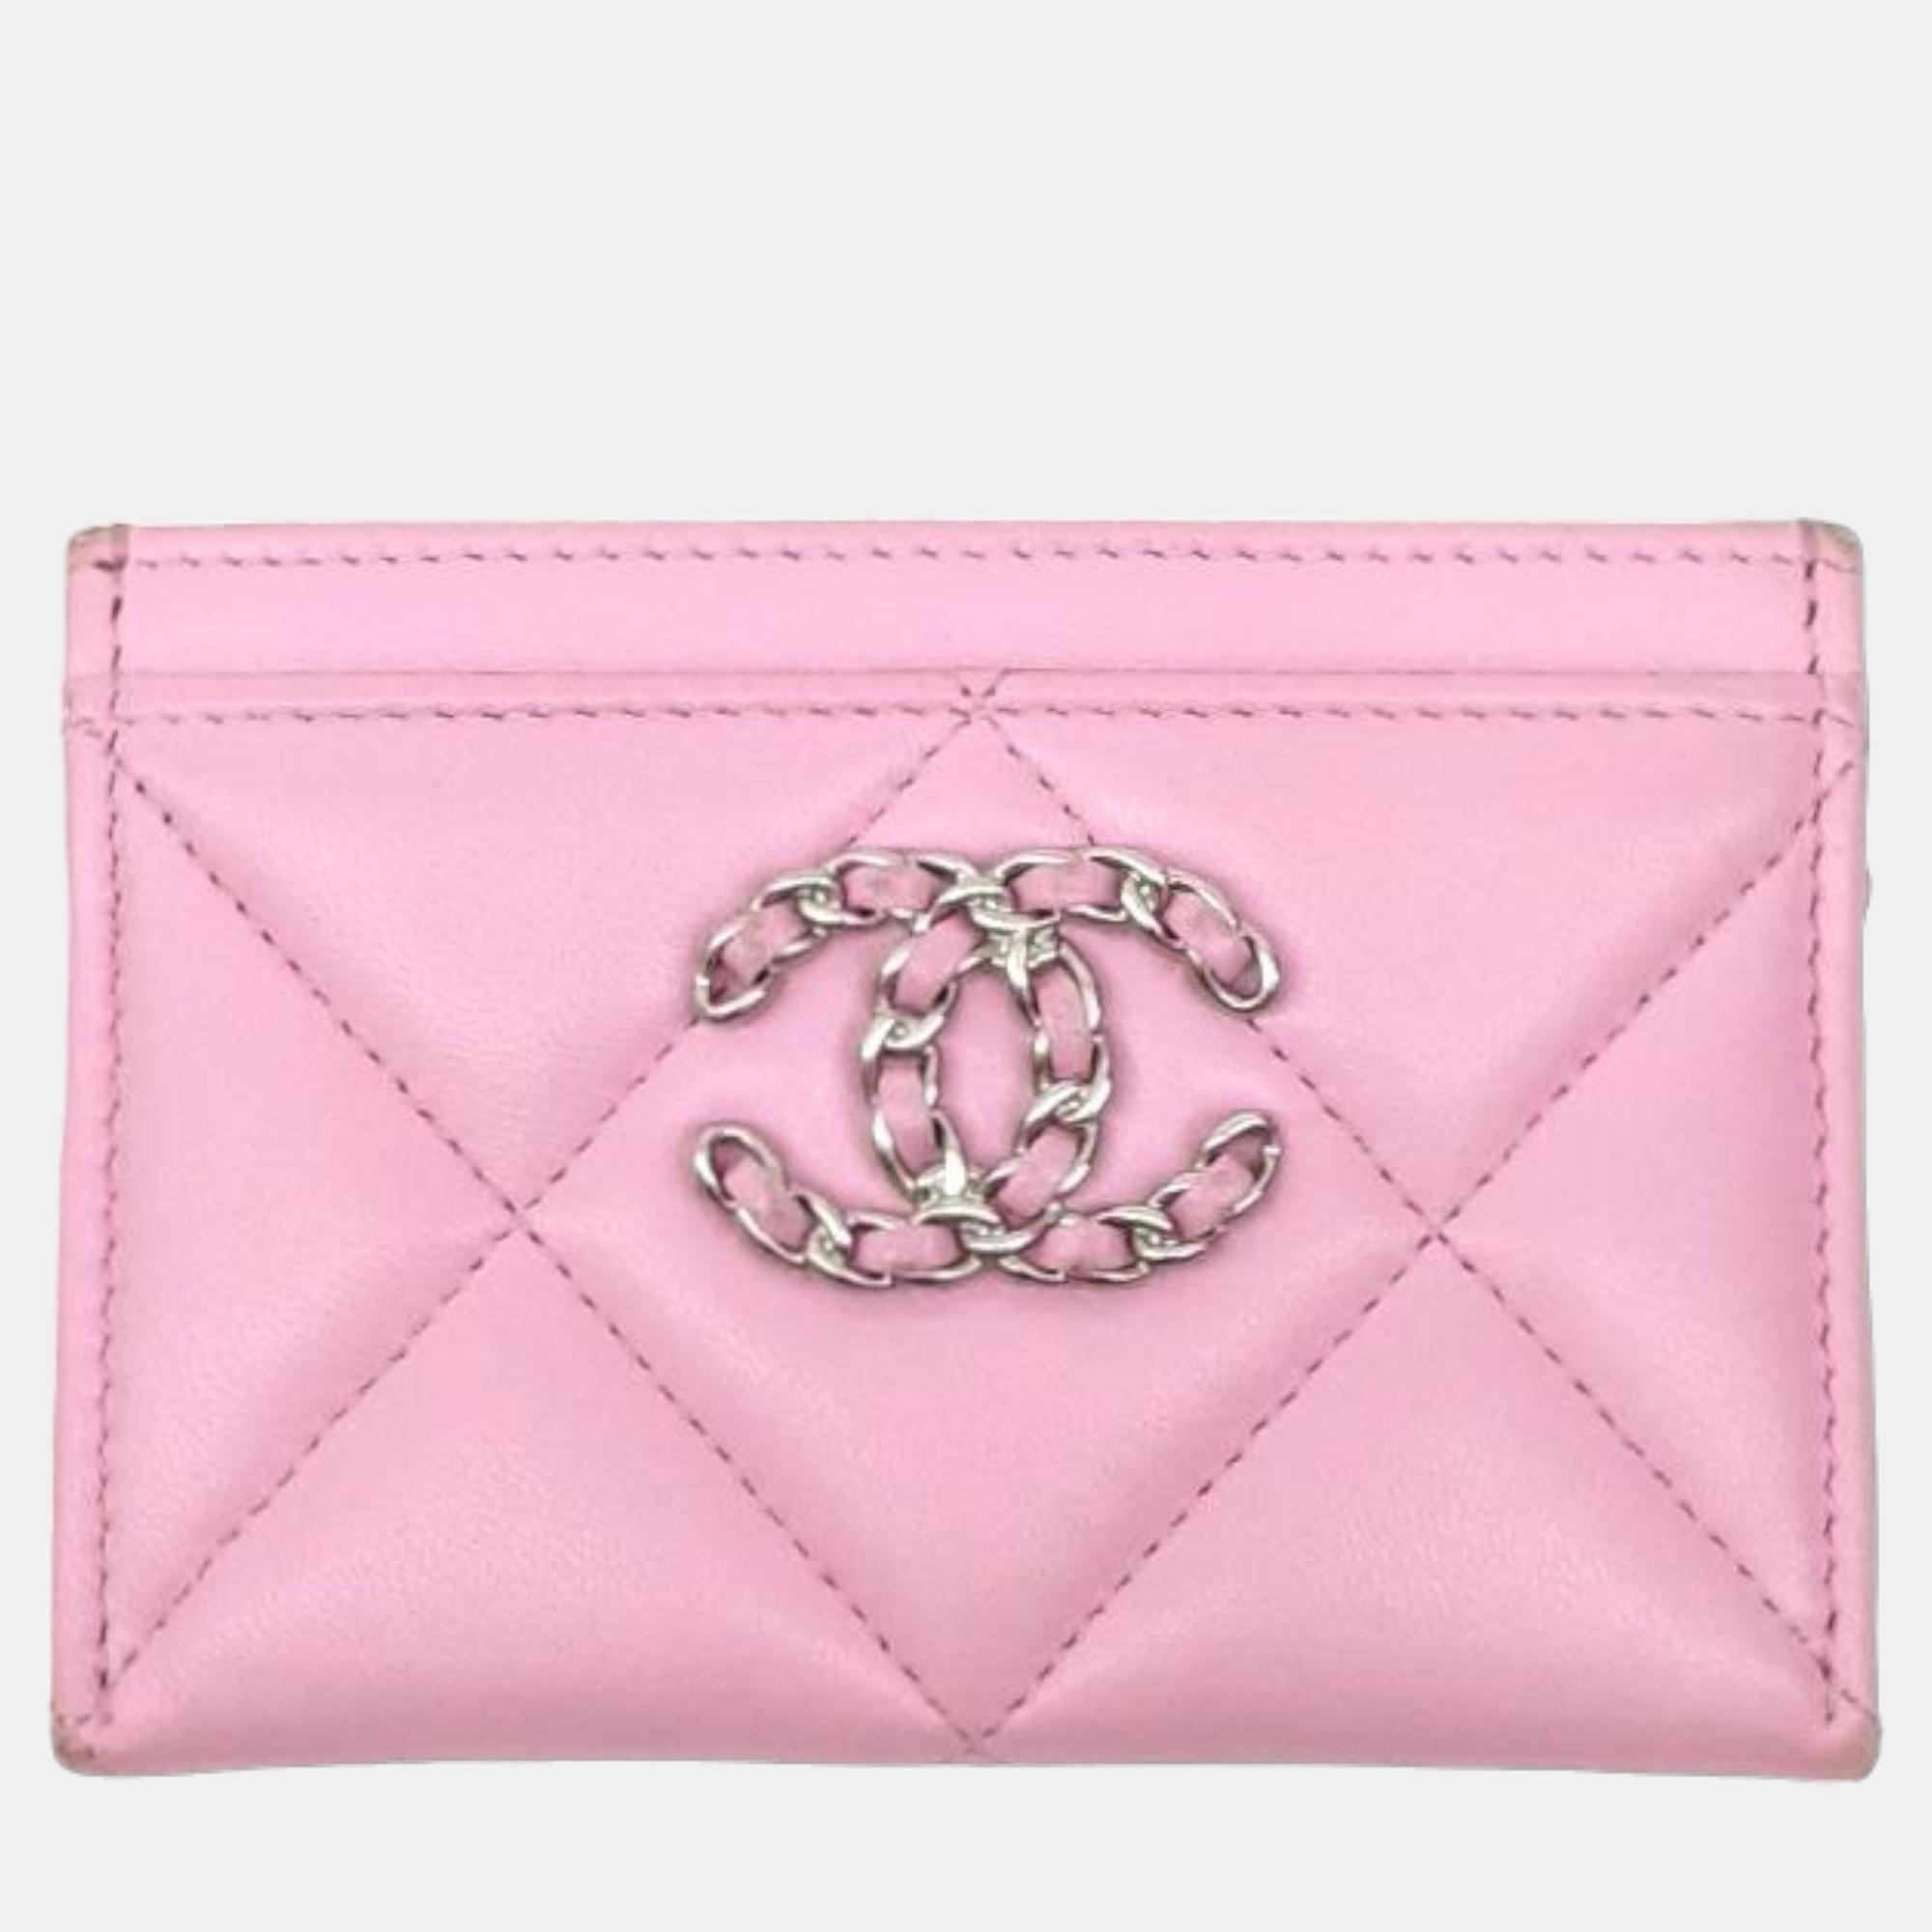 Chanel pink 19 card wallet